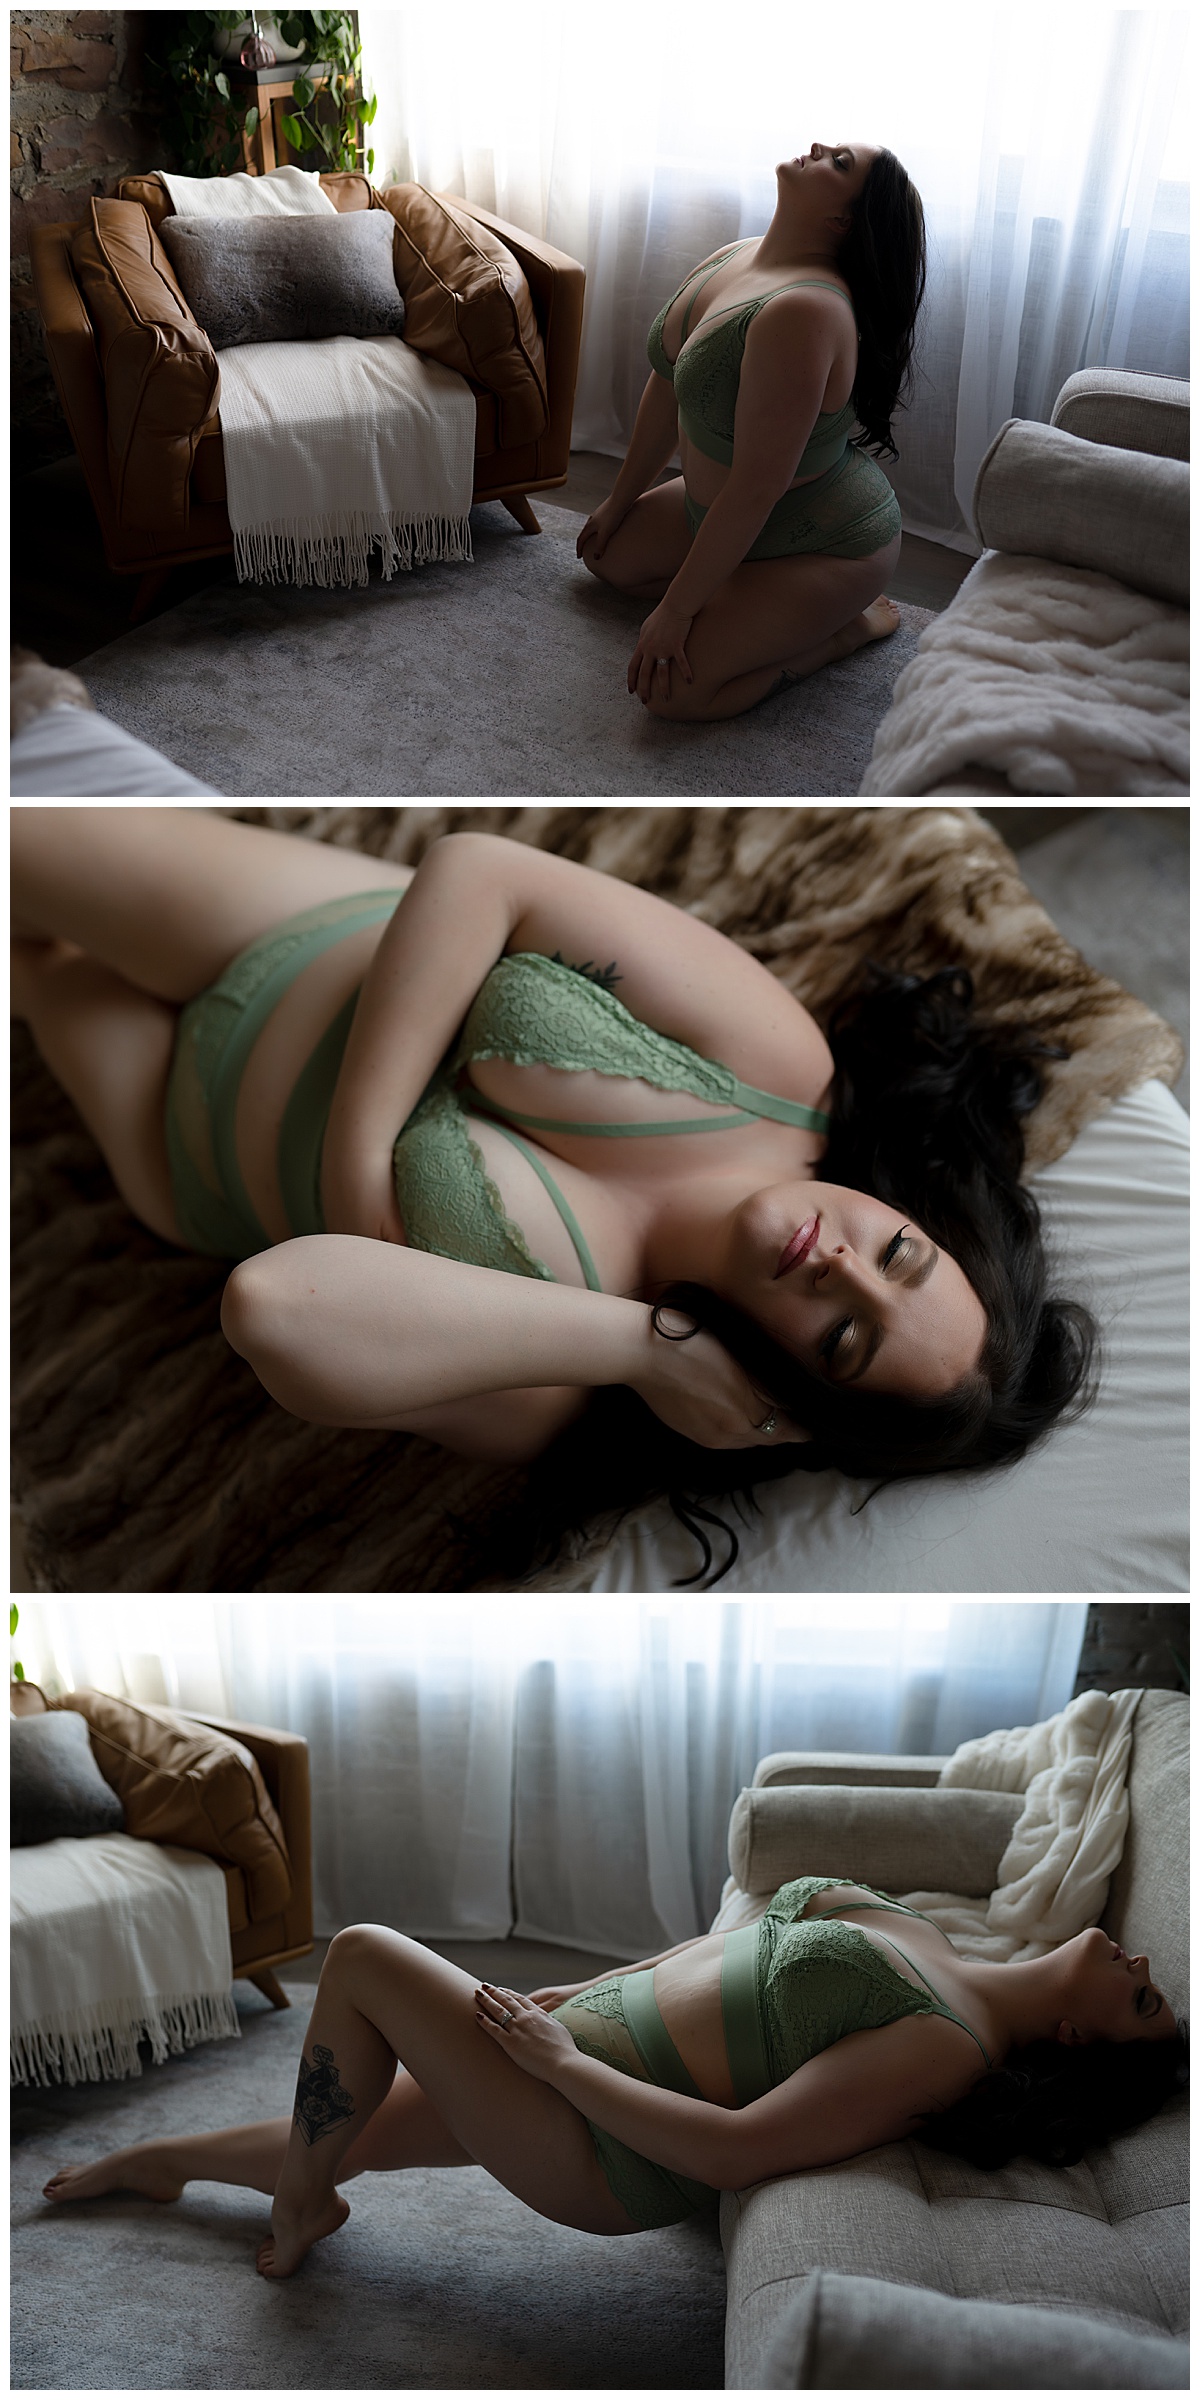 Woman kneels by couch and lays on bed wearing Spring Lingerie Colors